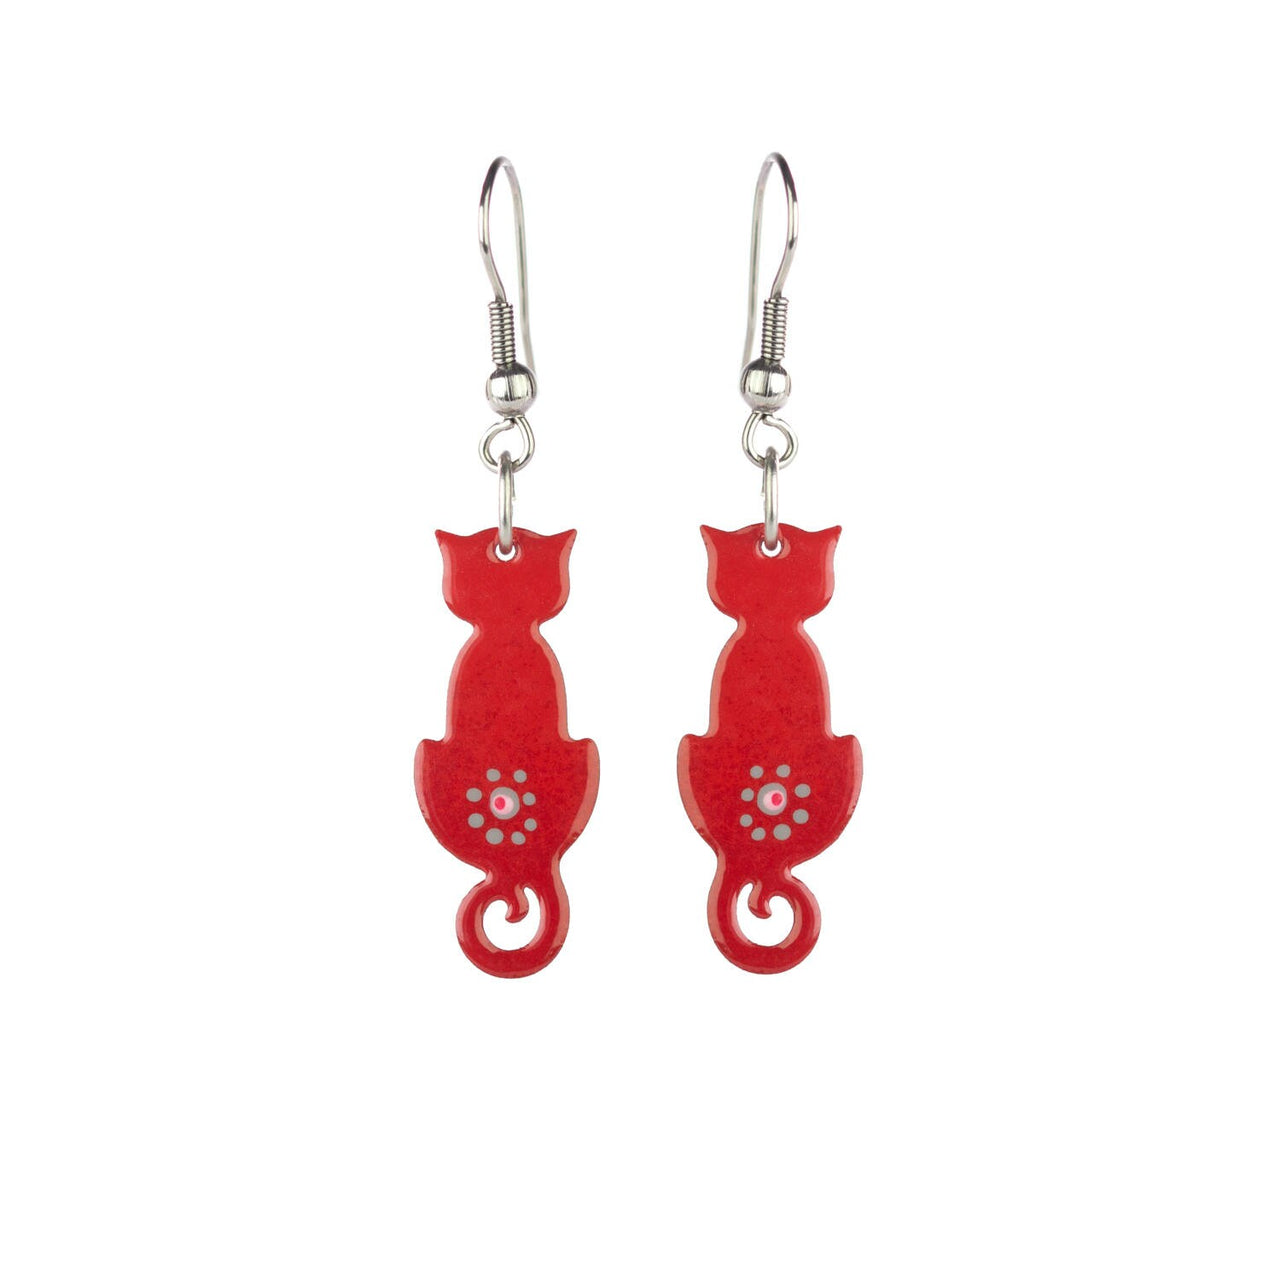 Quirky Red Cat Earrings